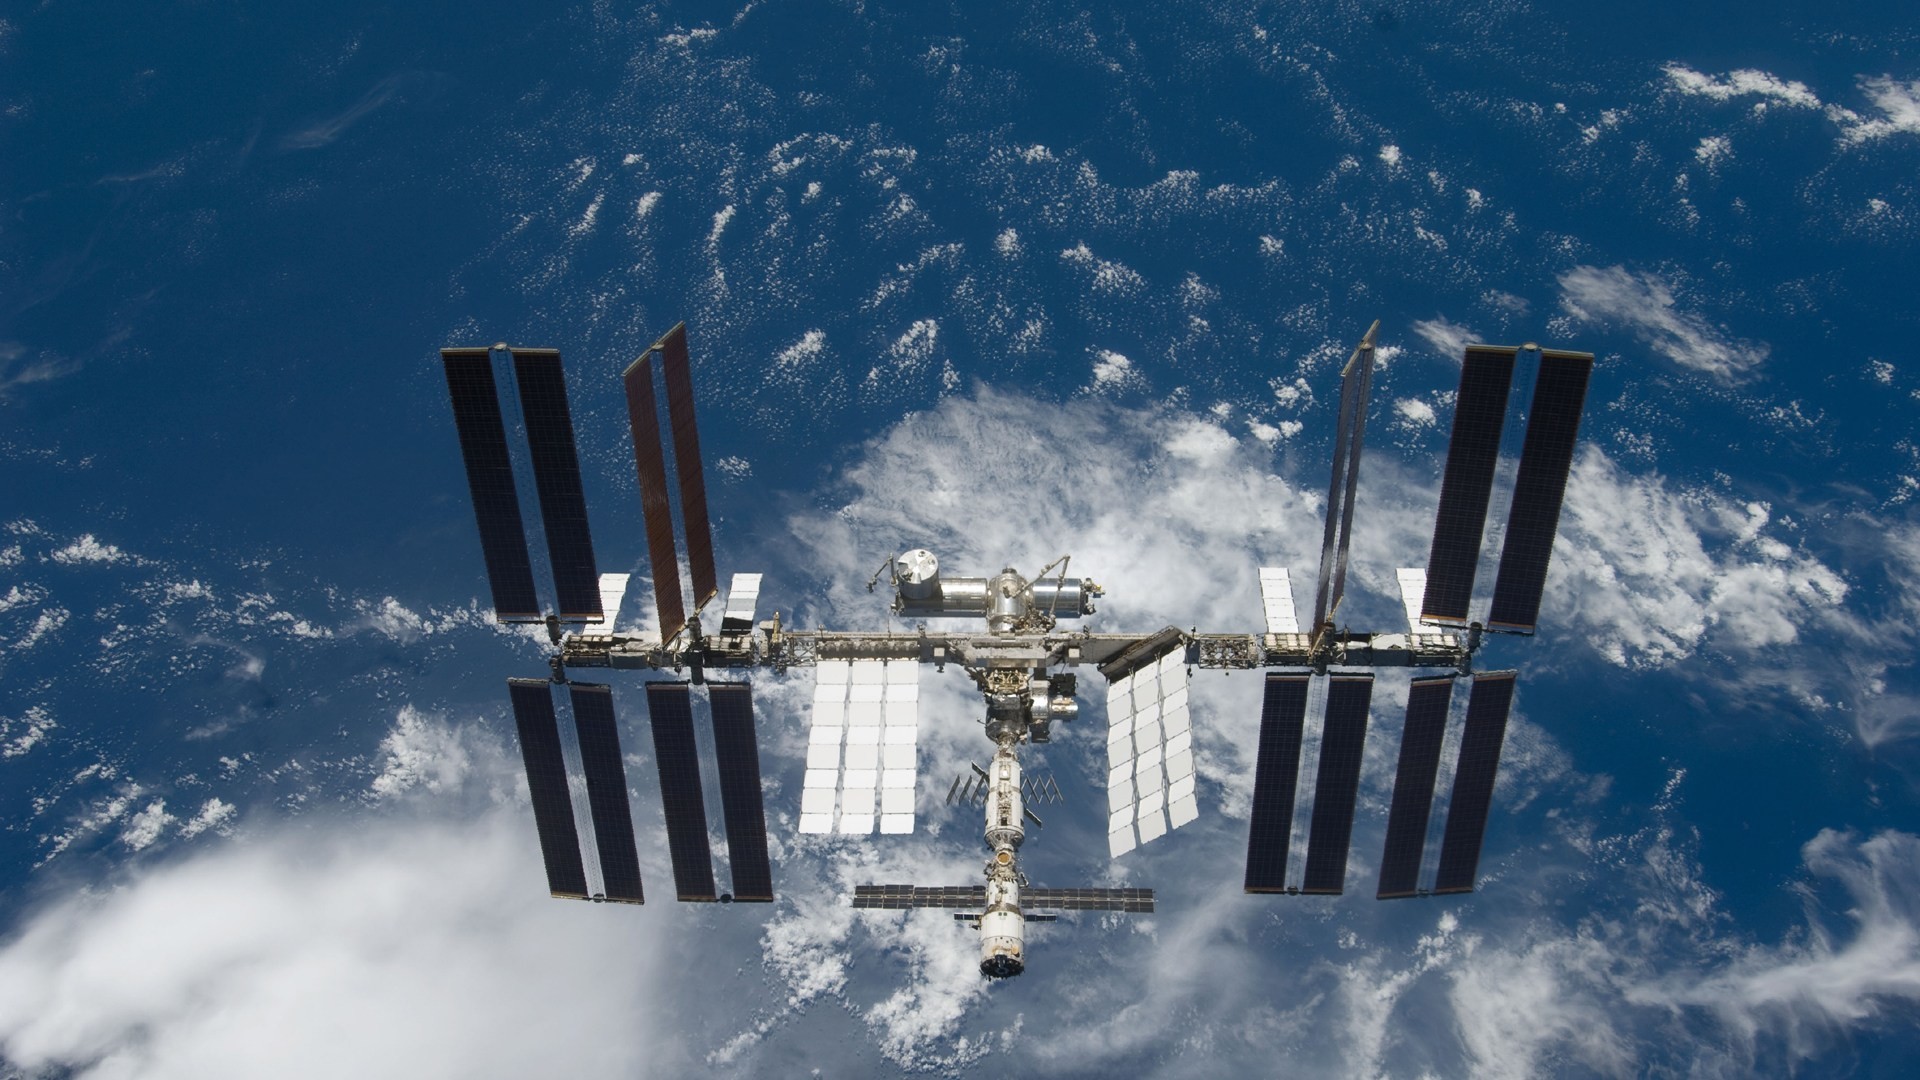 1920x1080 During the operational life of the ISS, scientists and experts from a wide  range of fields have performed experiments that couldn't have been tested  ...